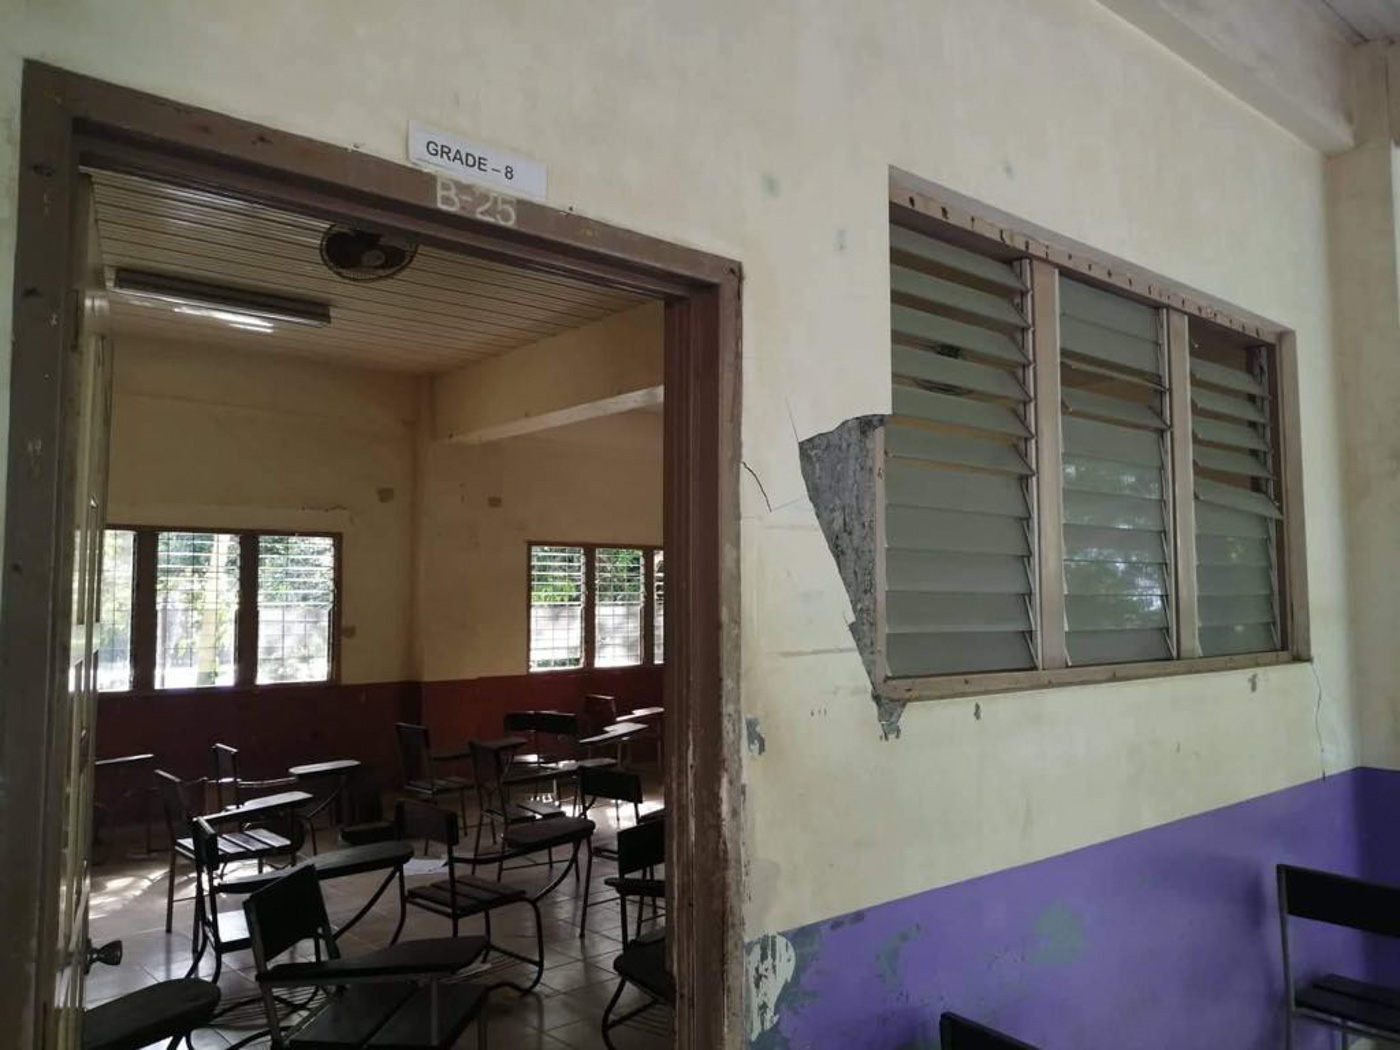 FOR REPAIR. One school building was limited to restricted use while another was deemed unsafe. Photo from QC DRRMC 